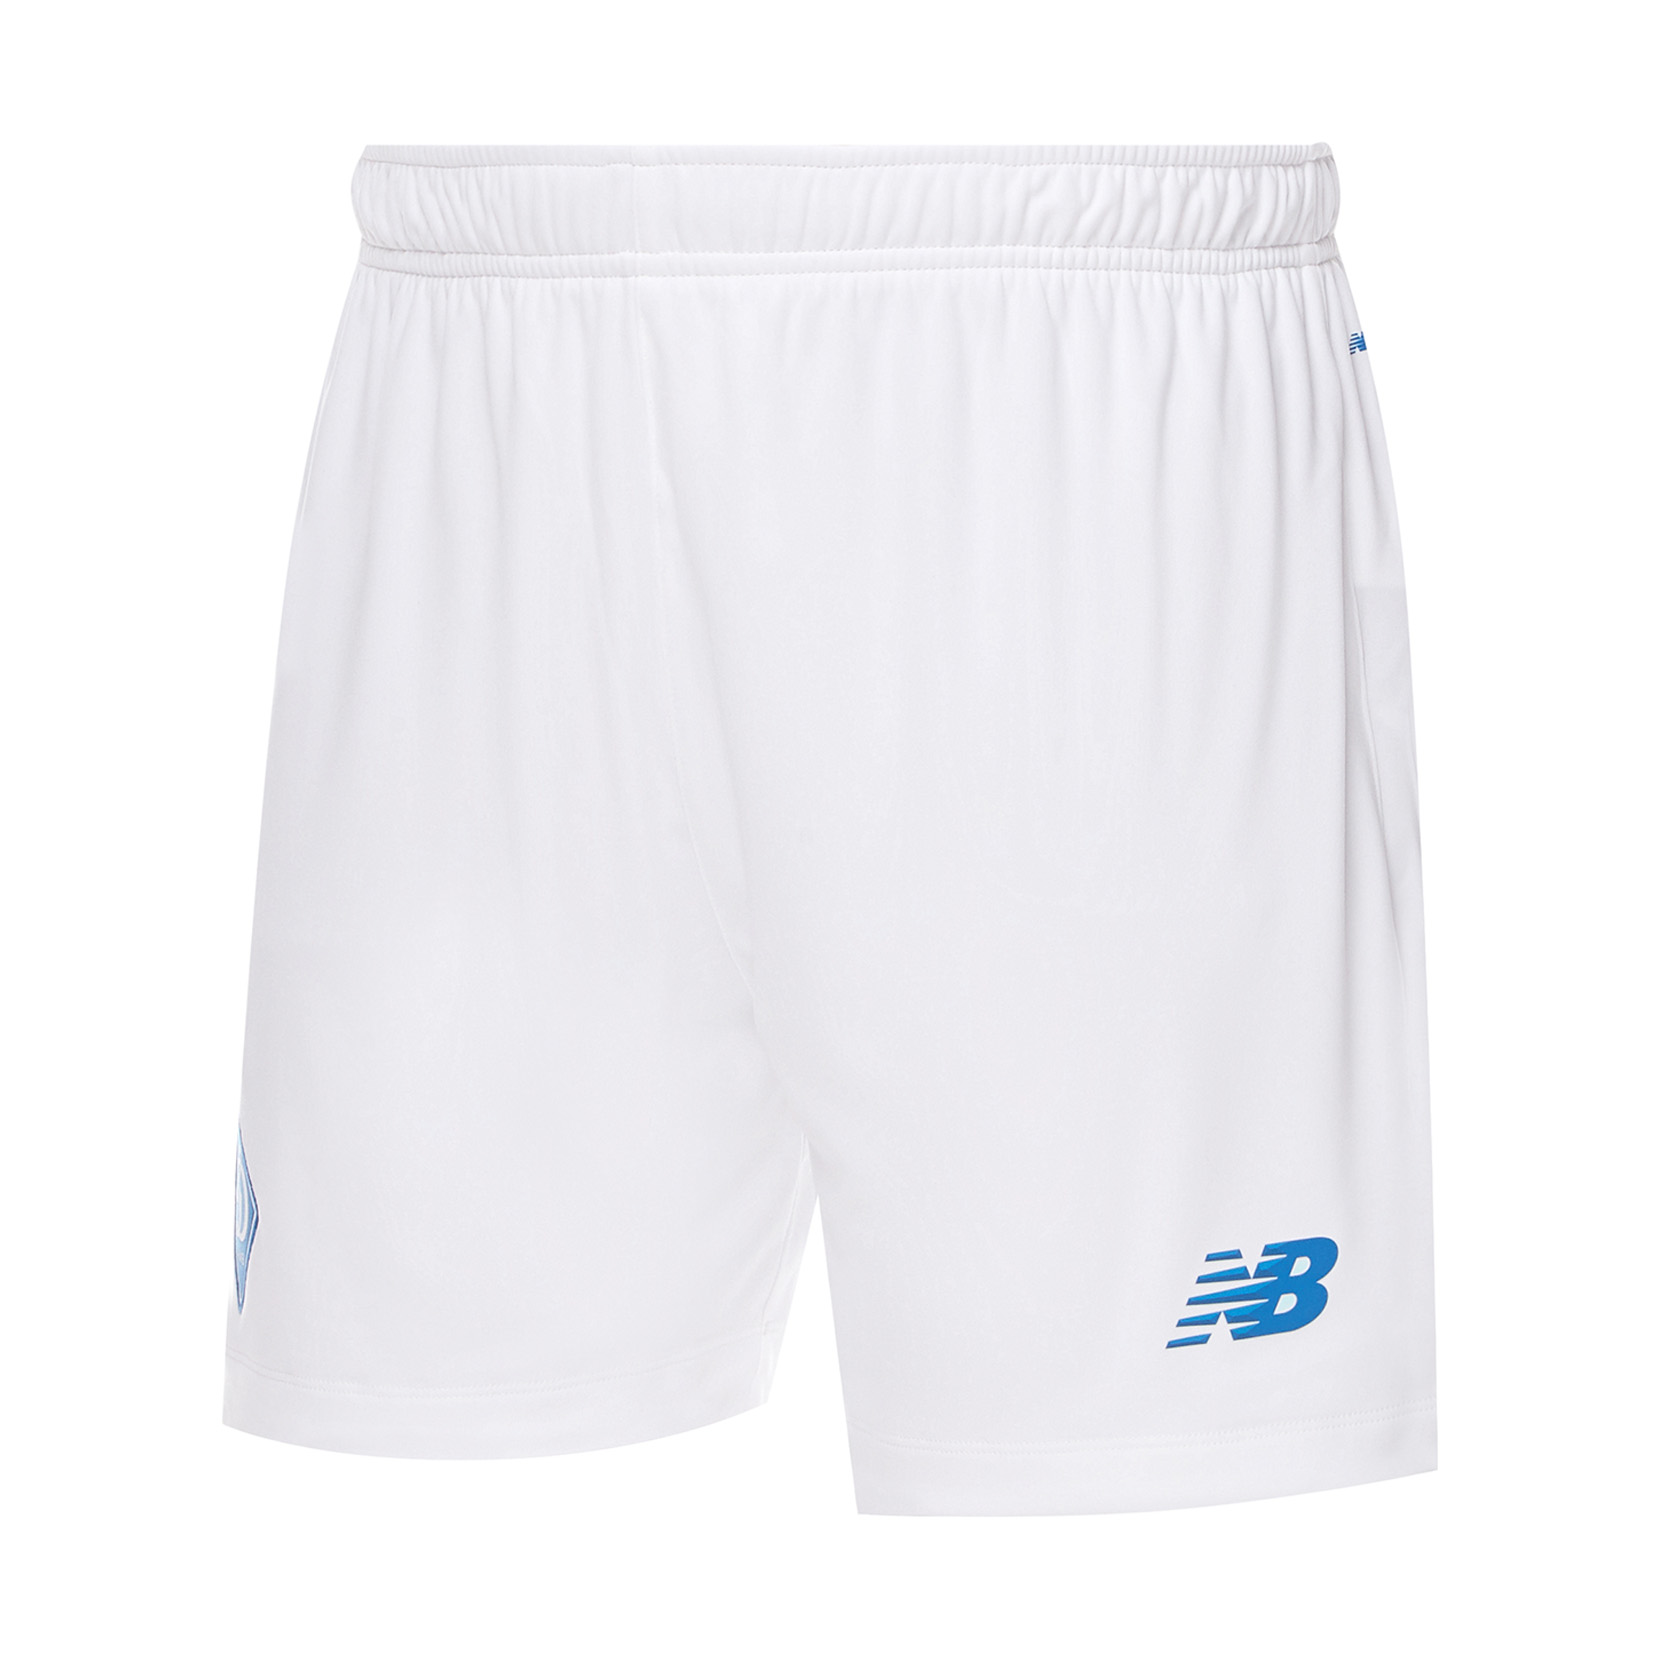 FCDK home shorts